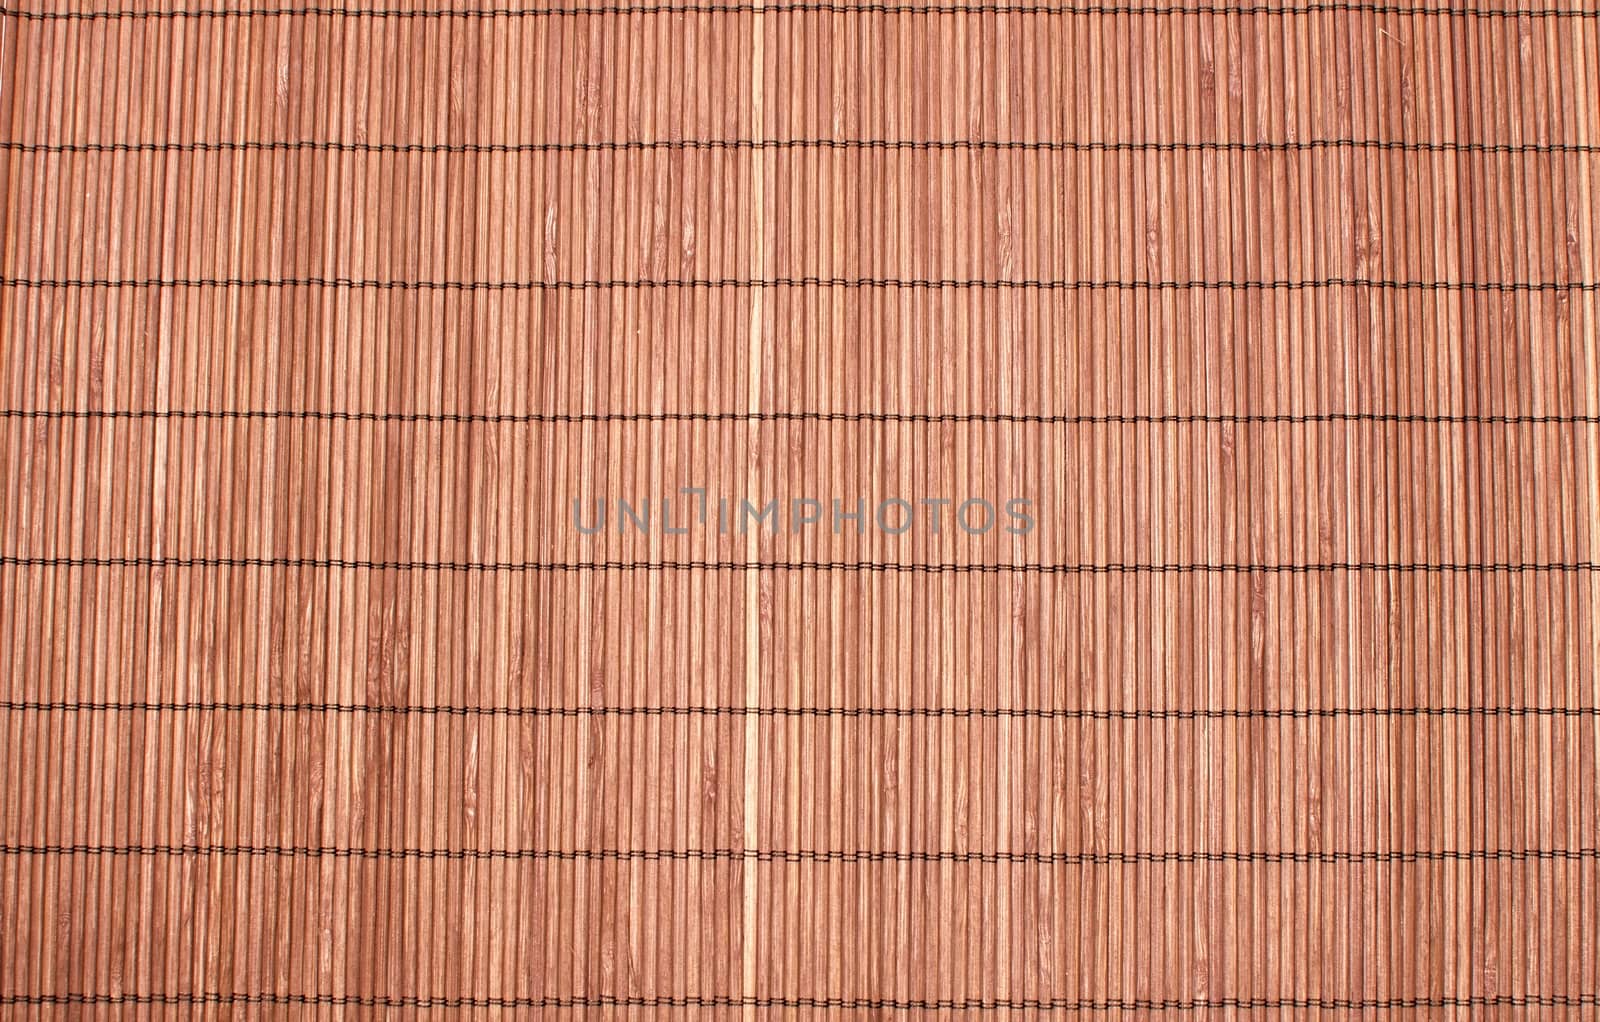 Bamboo brown straw mat as abstract texture background composition, top view above by mitakag